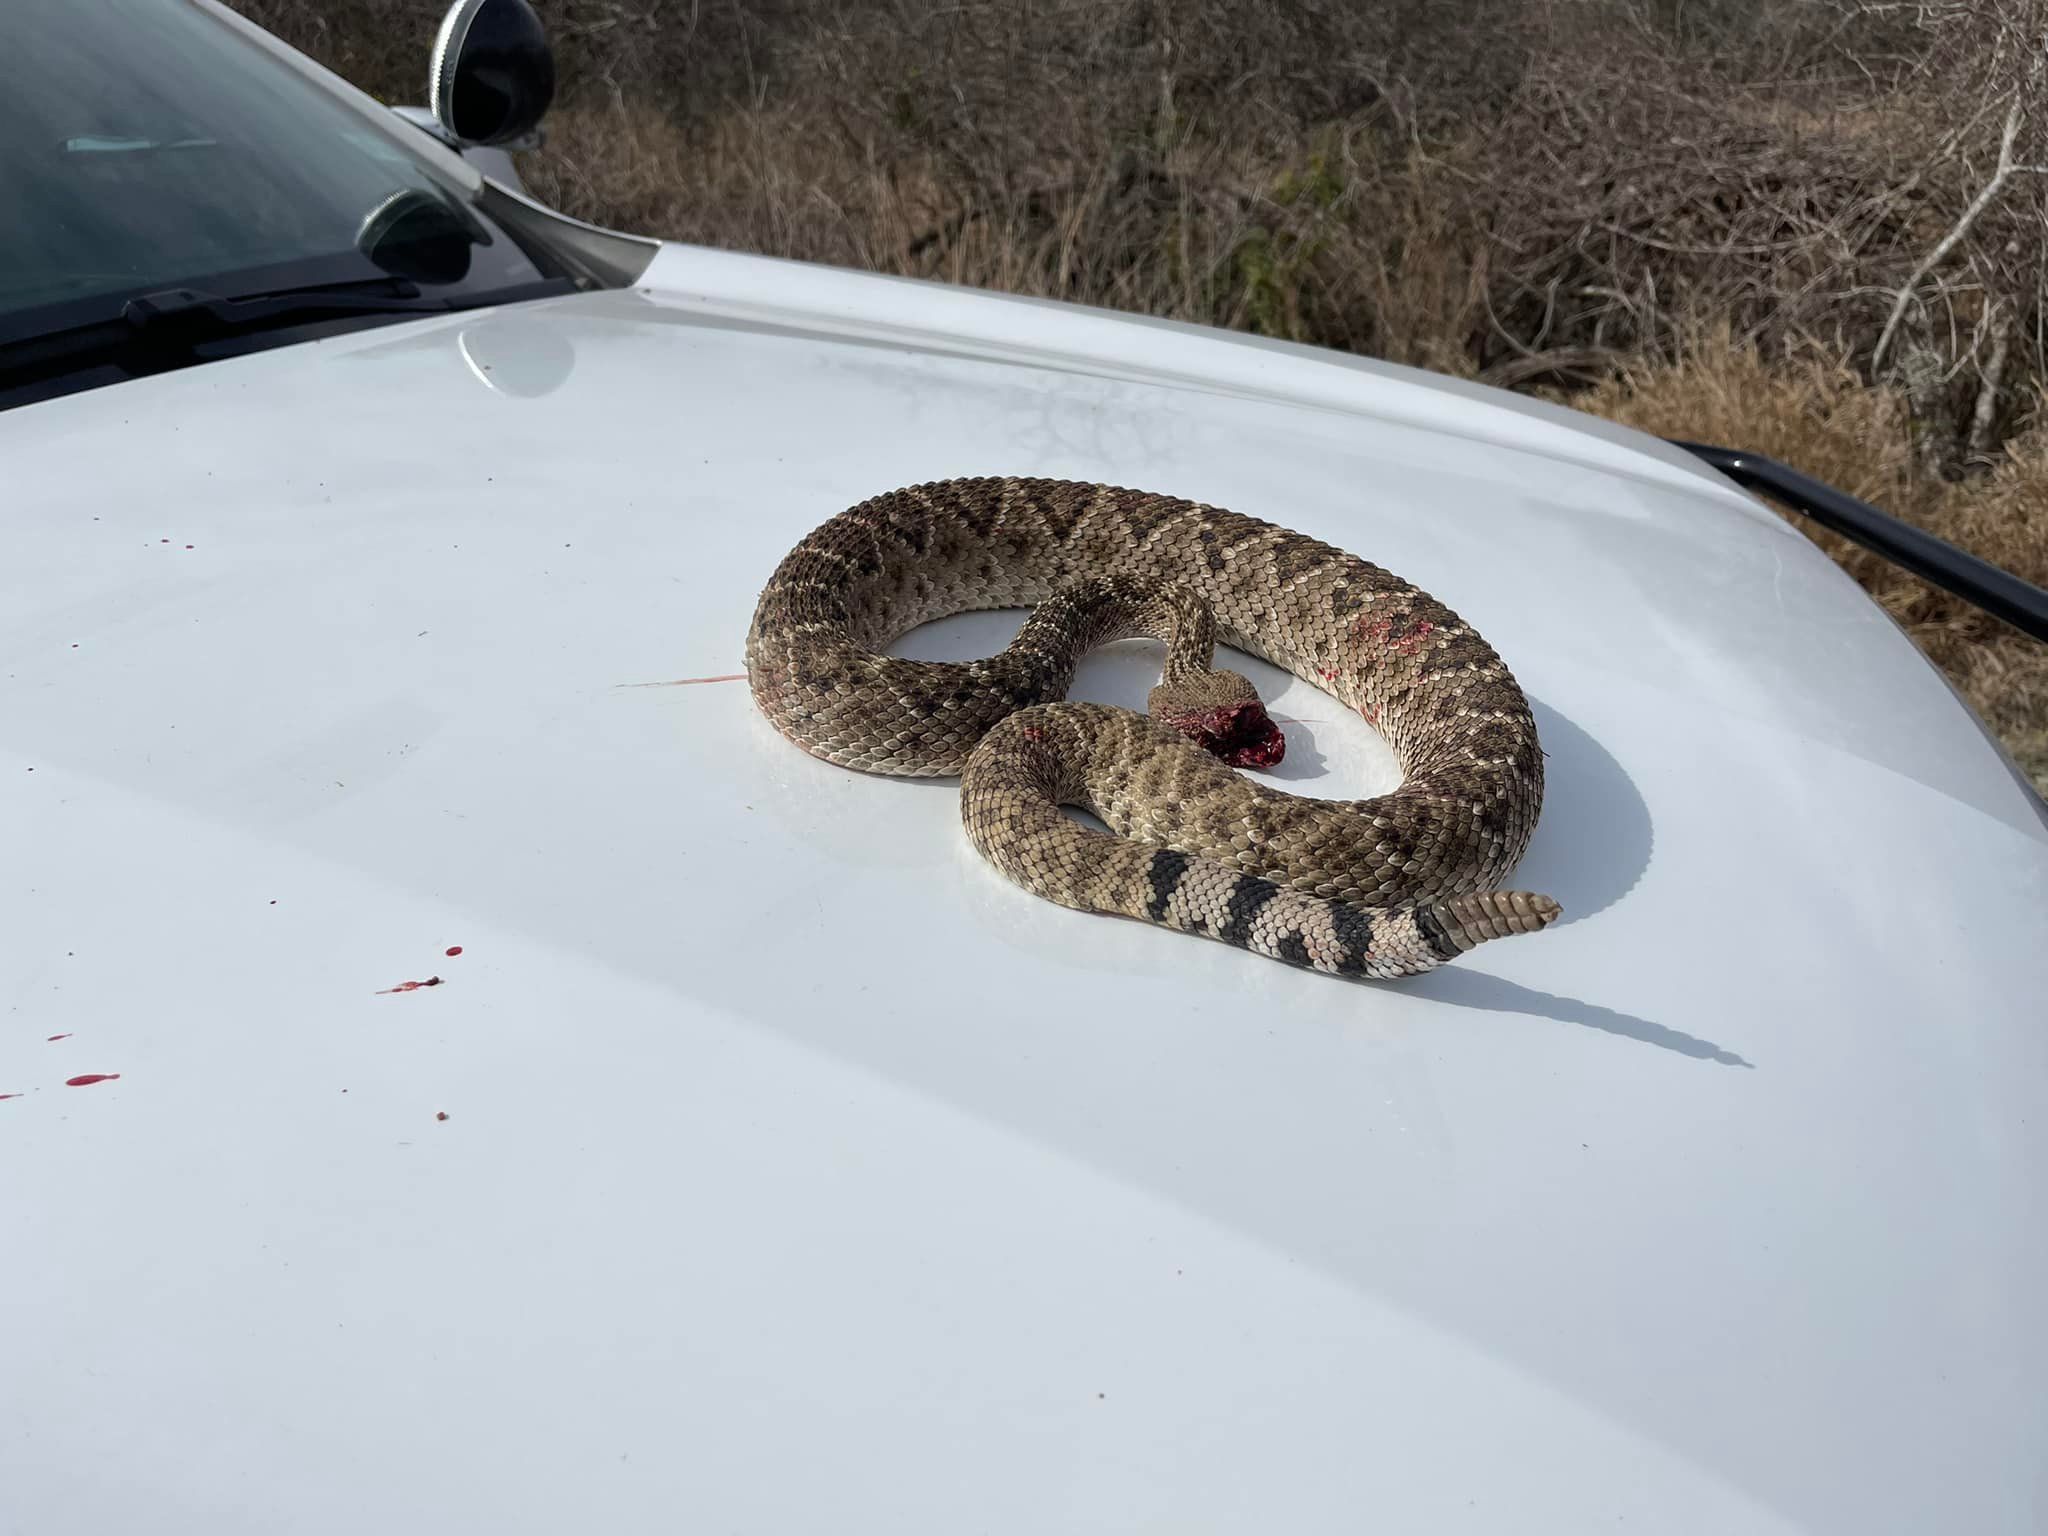 Can You Kill a Timber Rattlesnake in Texas?